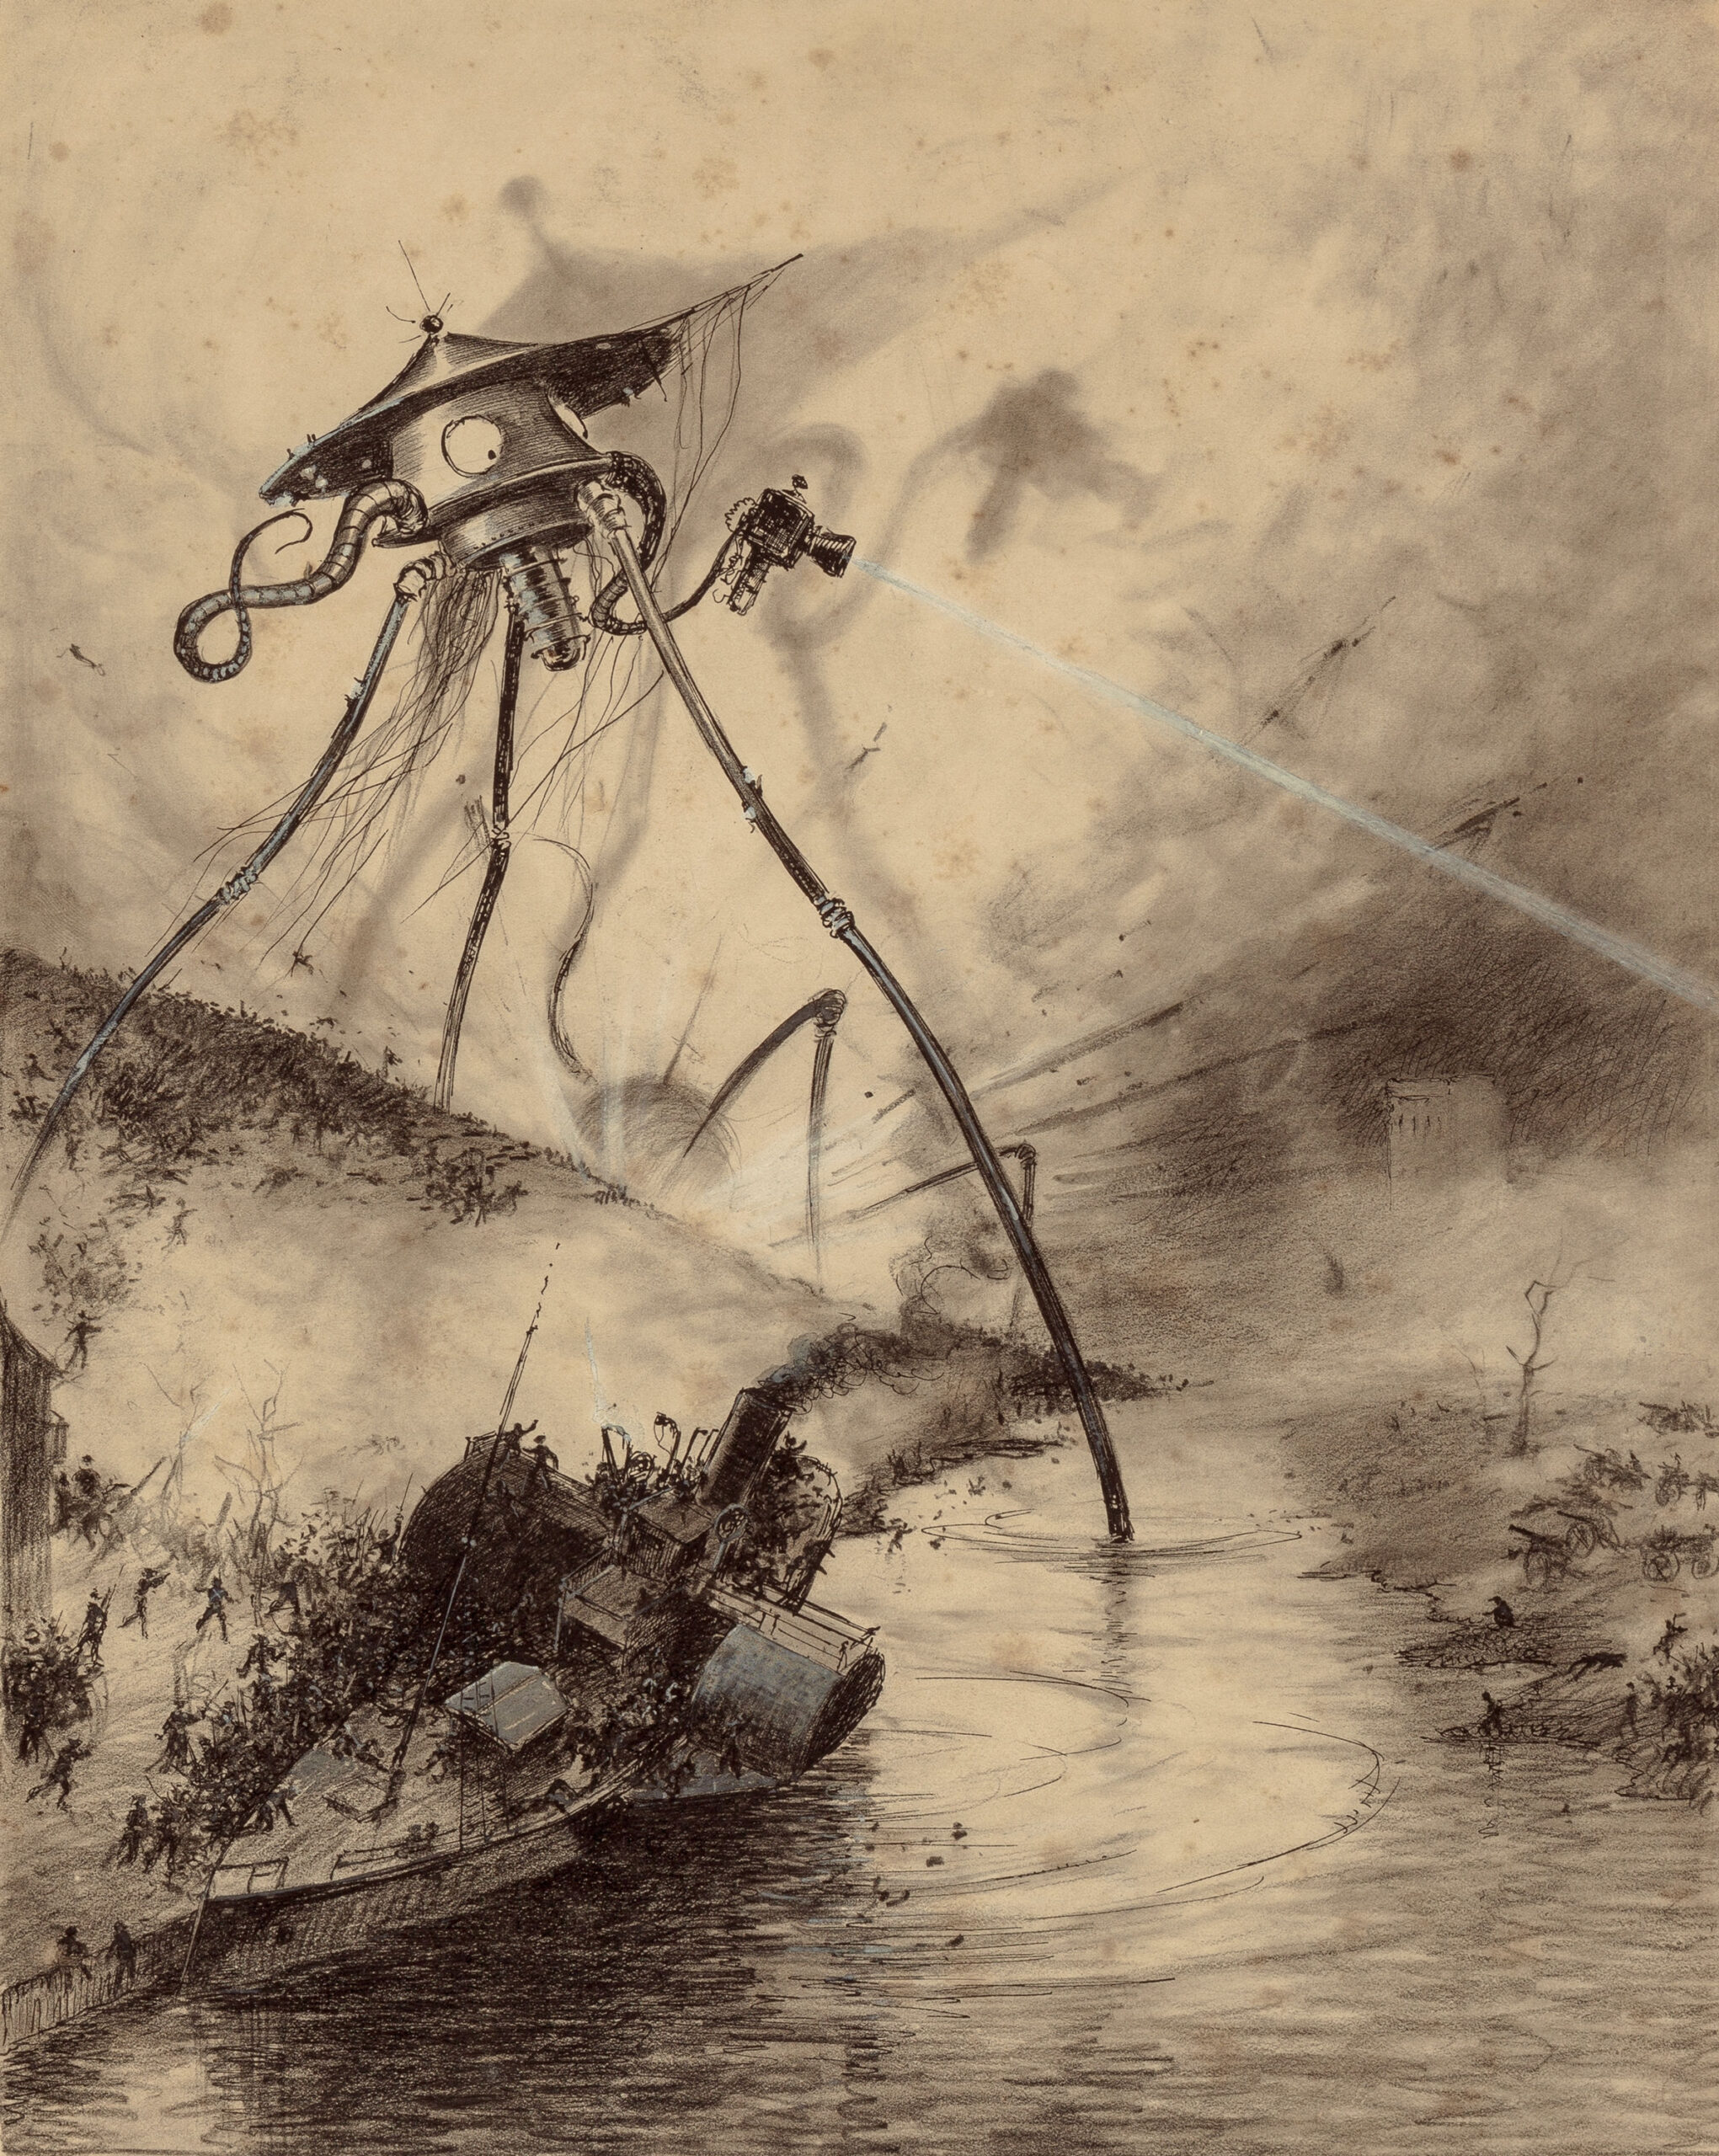 H. G. Wells’ 1897 novel The War of the Worlds, as illustrated by Henrique Alvim Corrêa